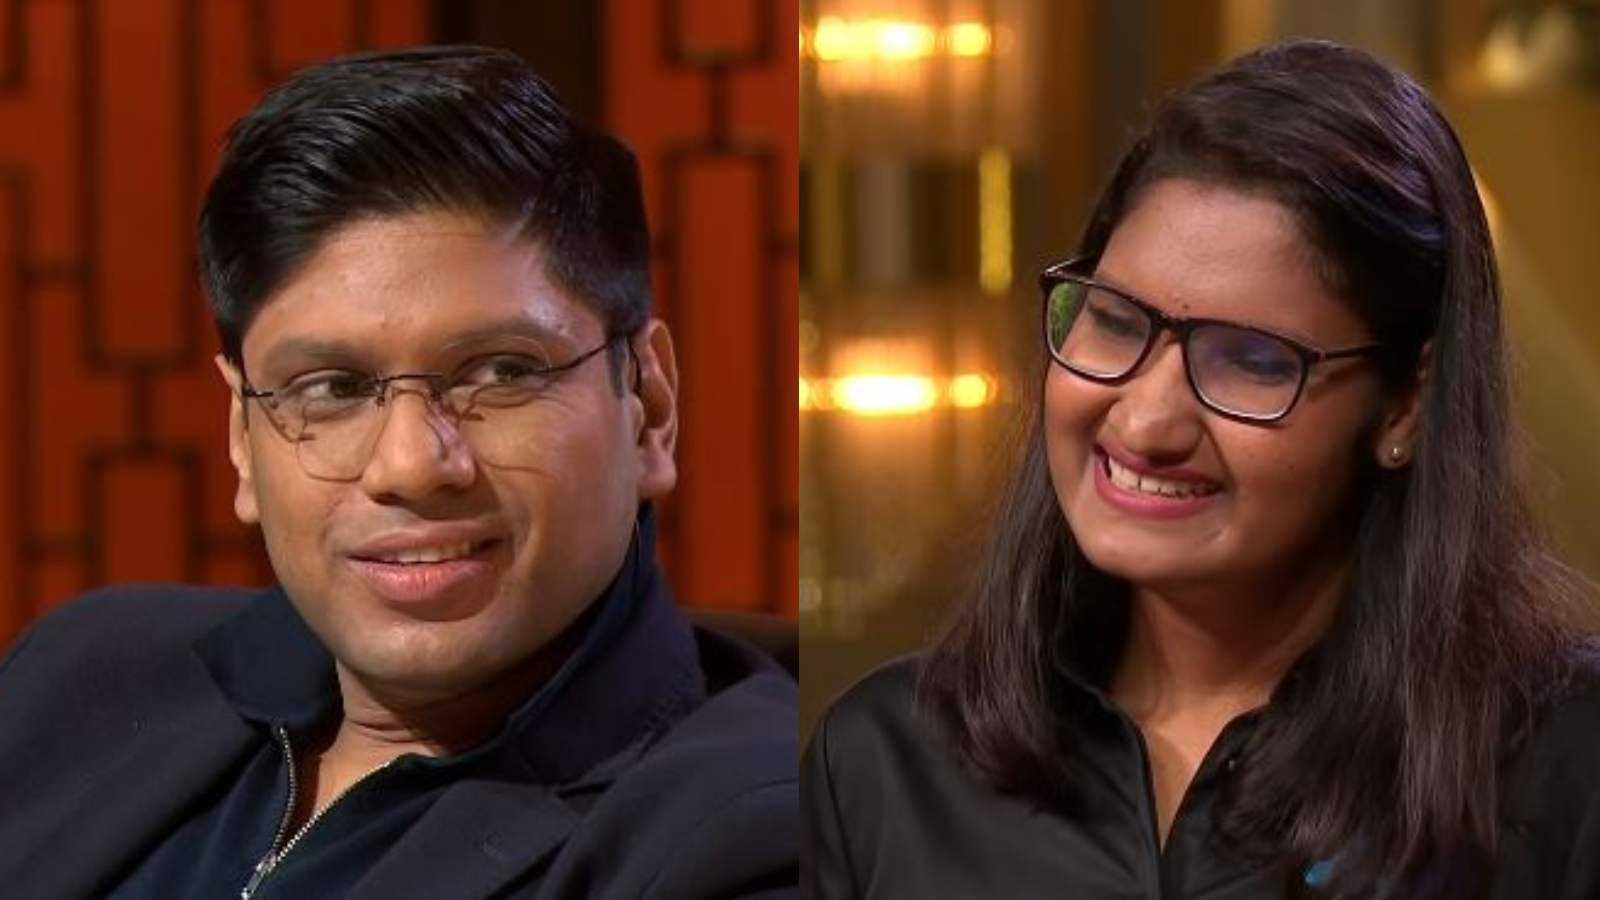 Shark Tank India: Peyush Bansal invested in a non-invasive glucometer because his pre-diabetic mother is afraid of needles